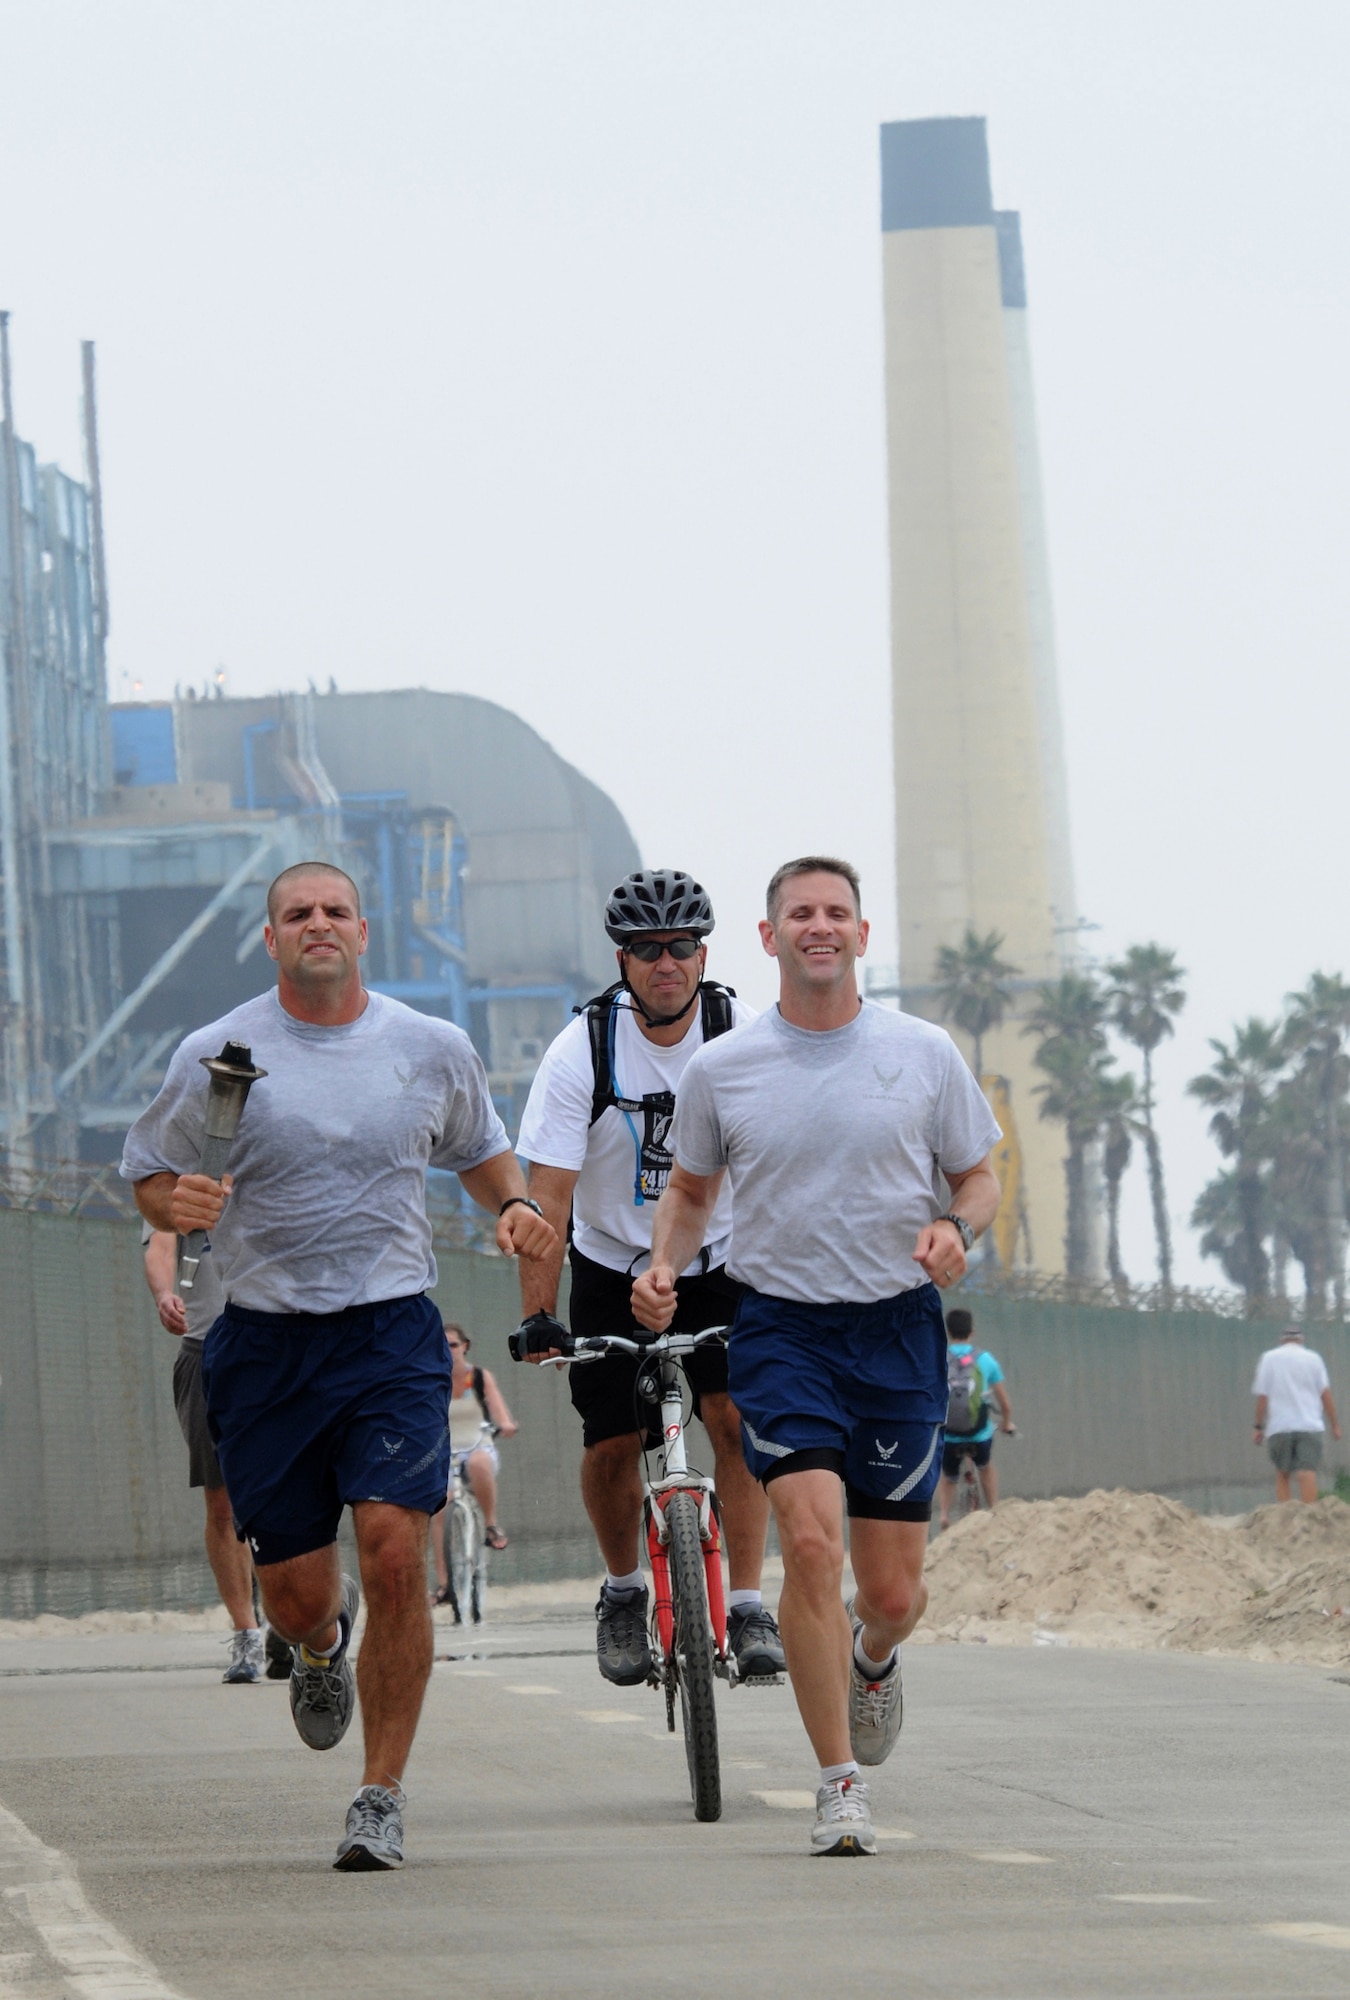 Runners pass by the power plant and beach in El Segundo on the way to Los Angeles AFB during the 24-hour POW-MIA relay, Sept. 16.  Runners traveled 21 miles from Fort MacArthur in San Pedro to Los Angeles Air Force Base in El Segundo. The relay lasted 24-hours with personnel running through the night around the base's track. (Photo by Joe Juarez)